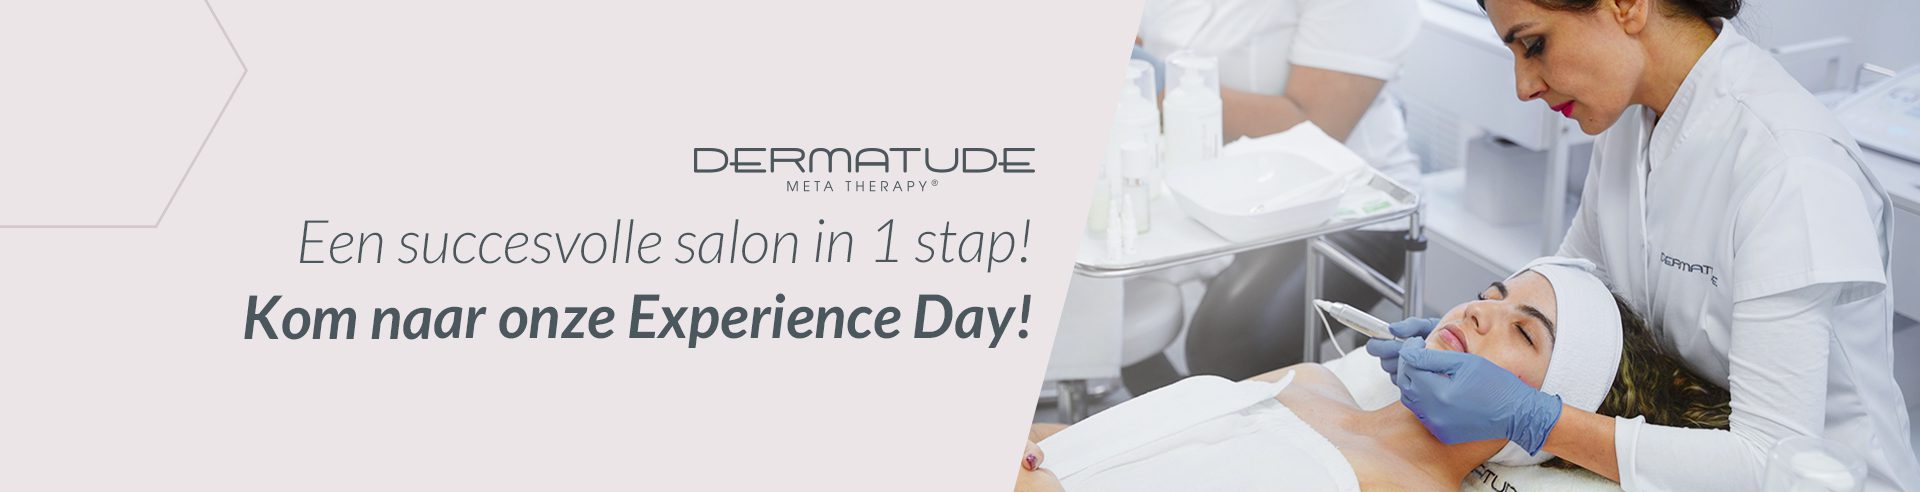 Experience Day Dermatude